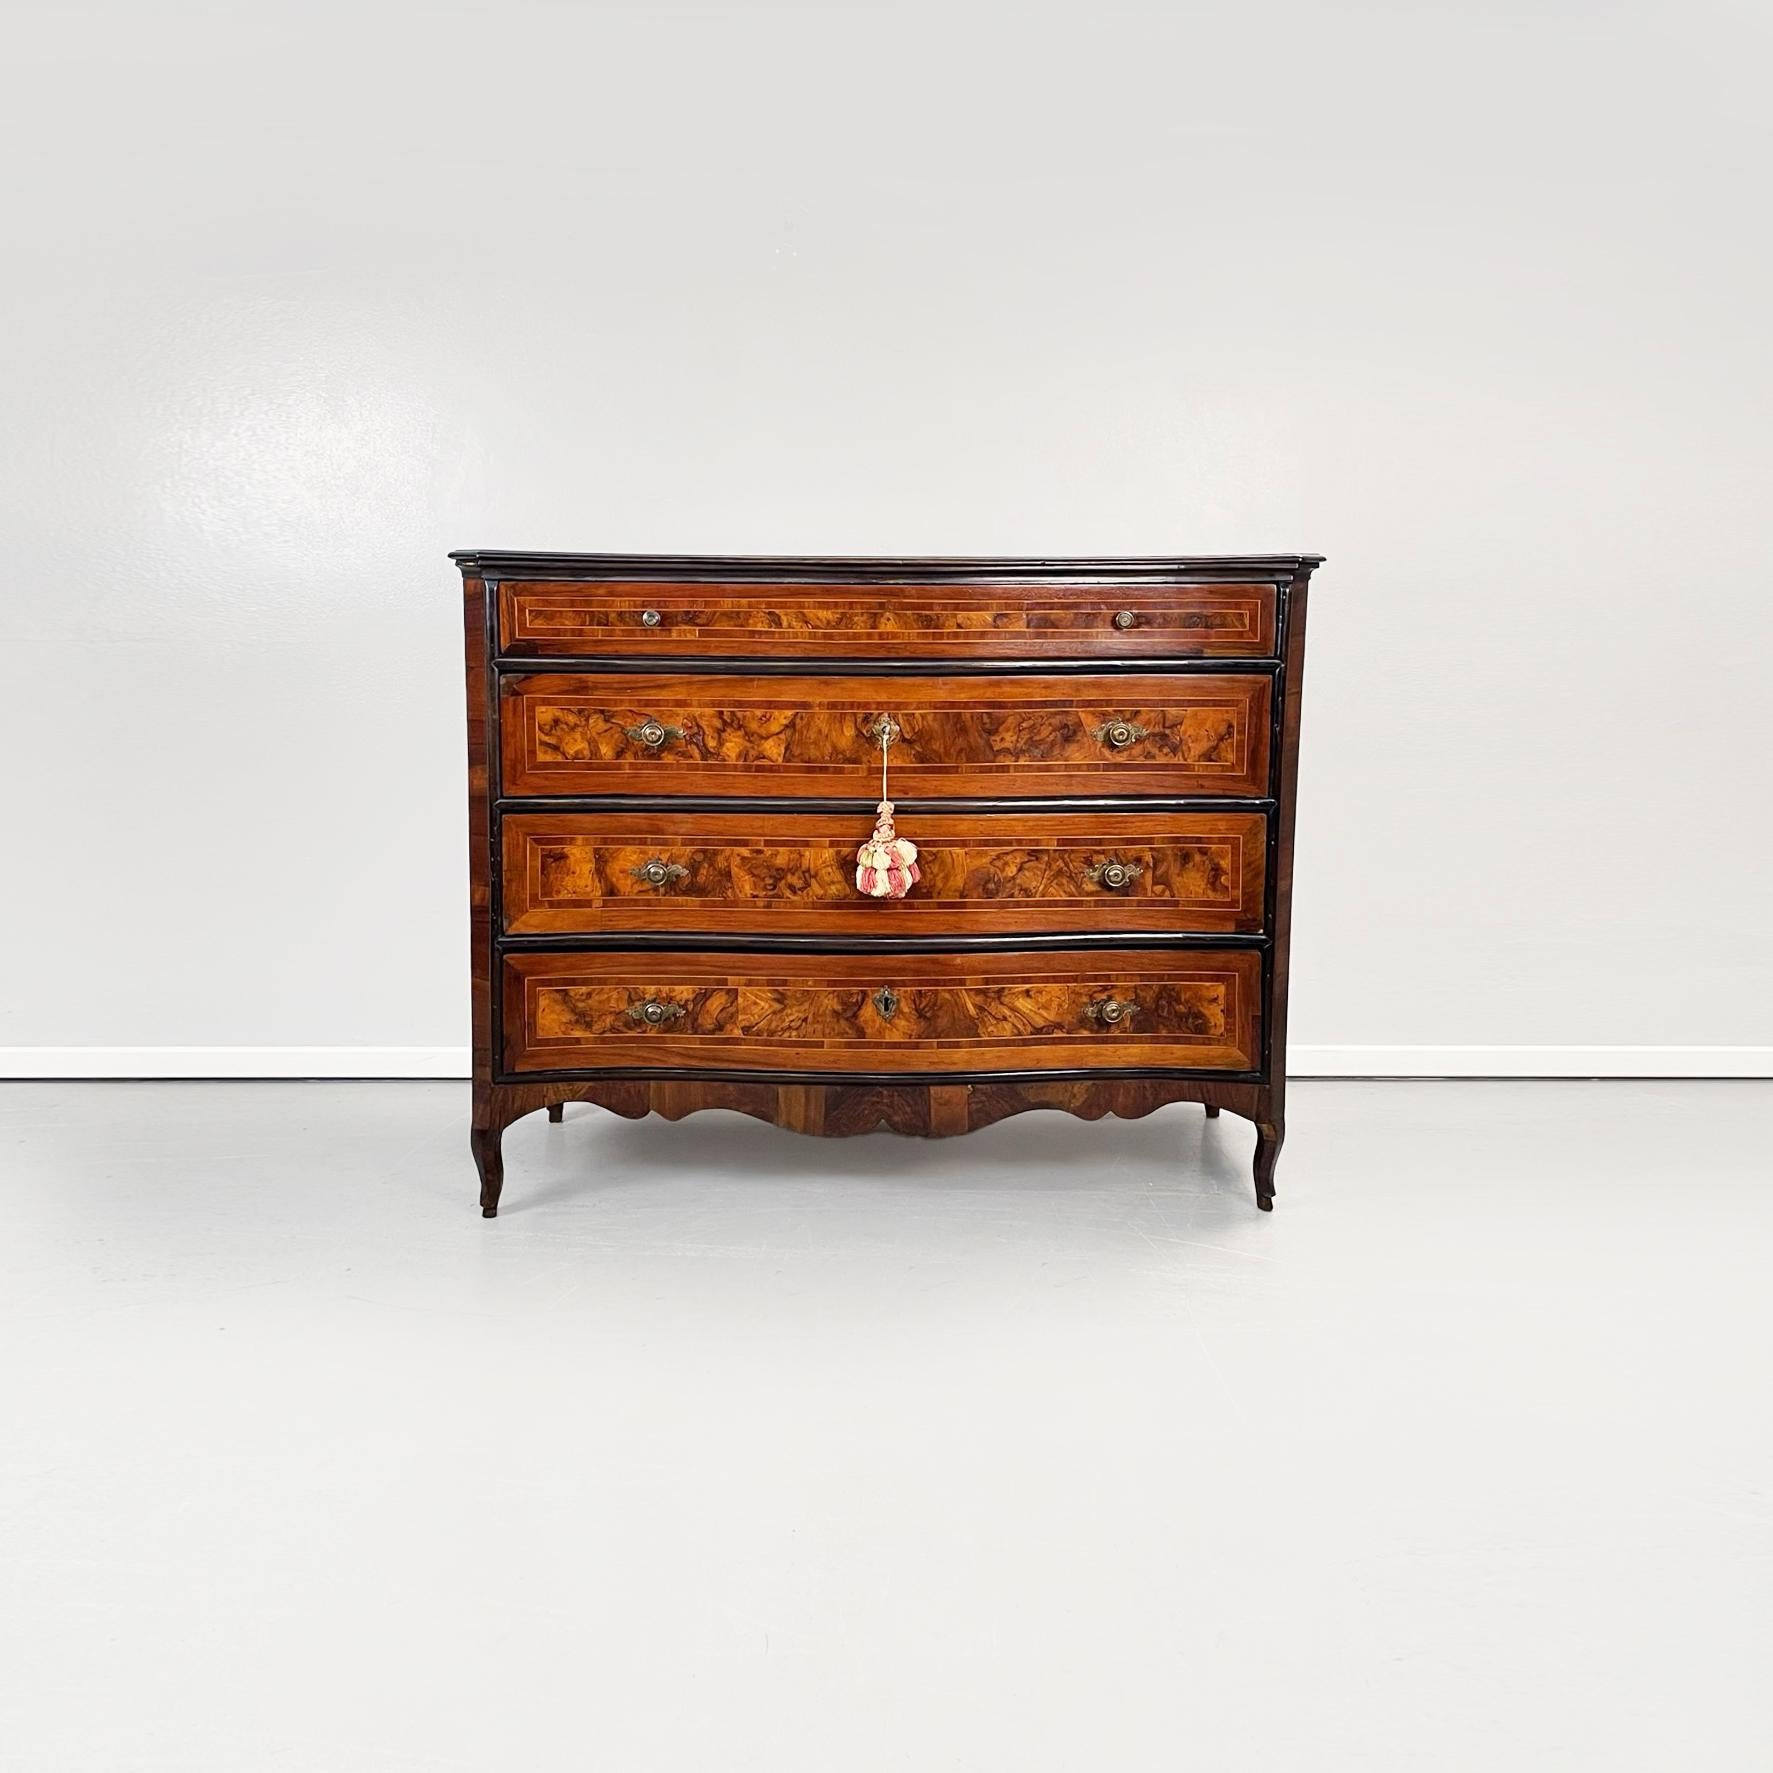 Italian baroque chests of drawers in wood and metal, 1730-1740s
Finely worked sideboard in light and dark wood. The sides and the front, where the 4 drawers are present, are moved and shaped. Round bronze knobs. Two drawers have lock and key.